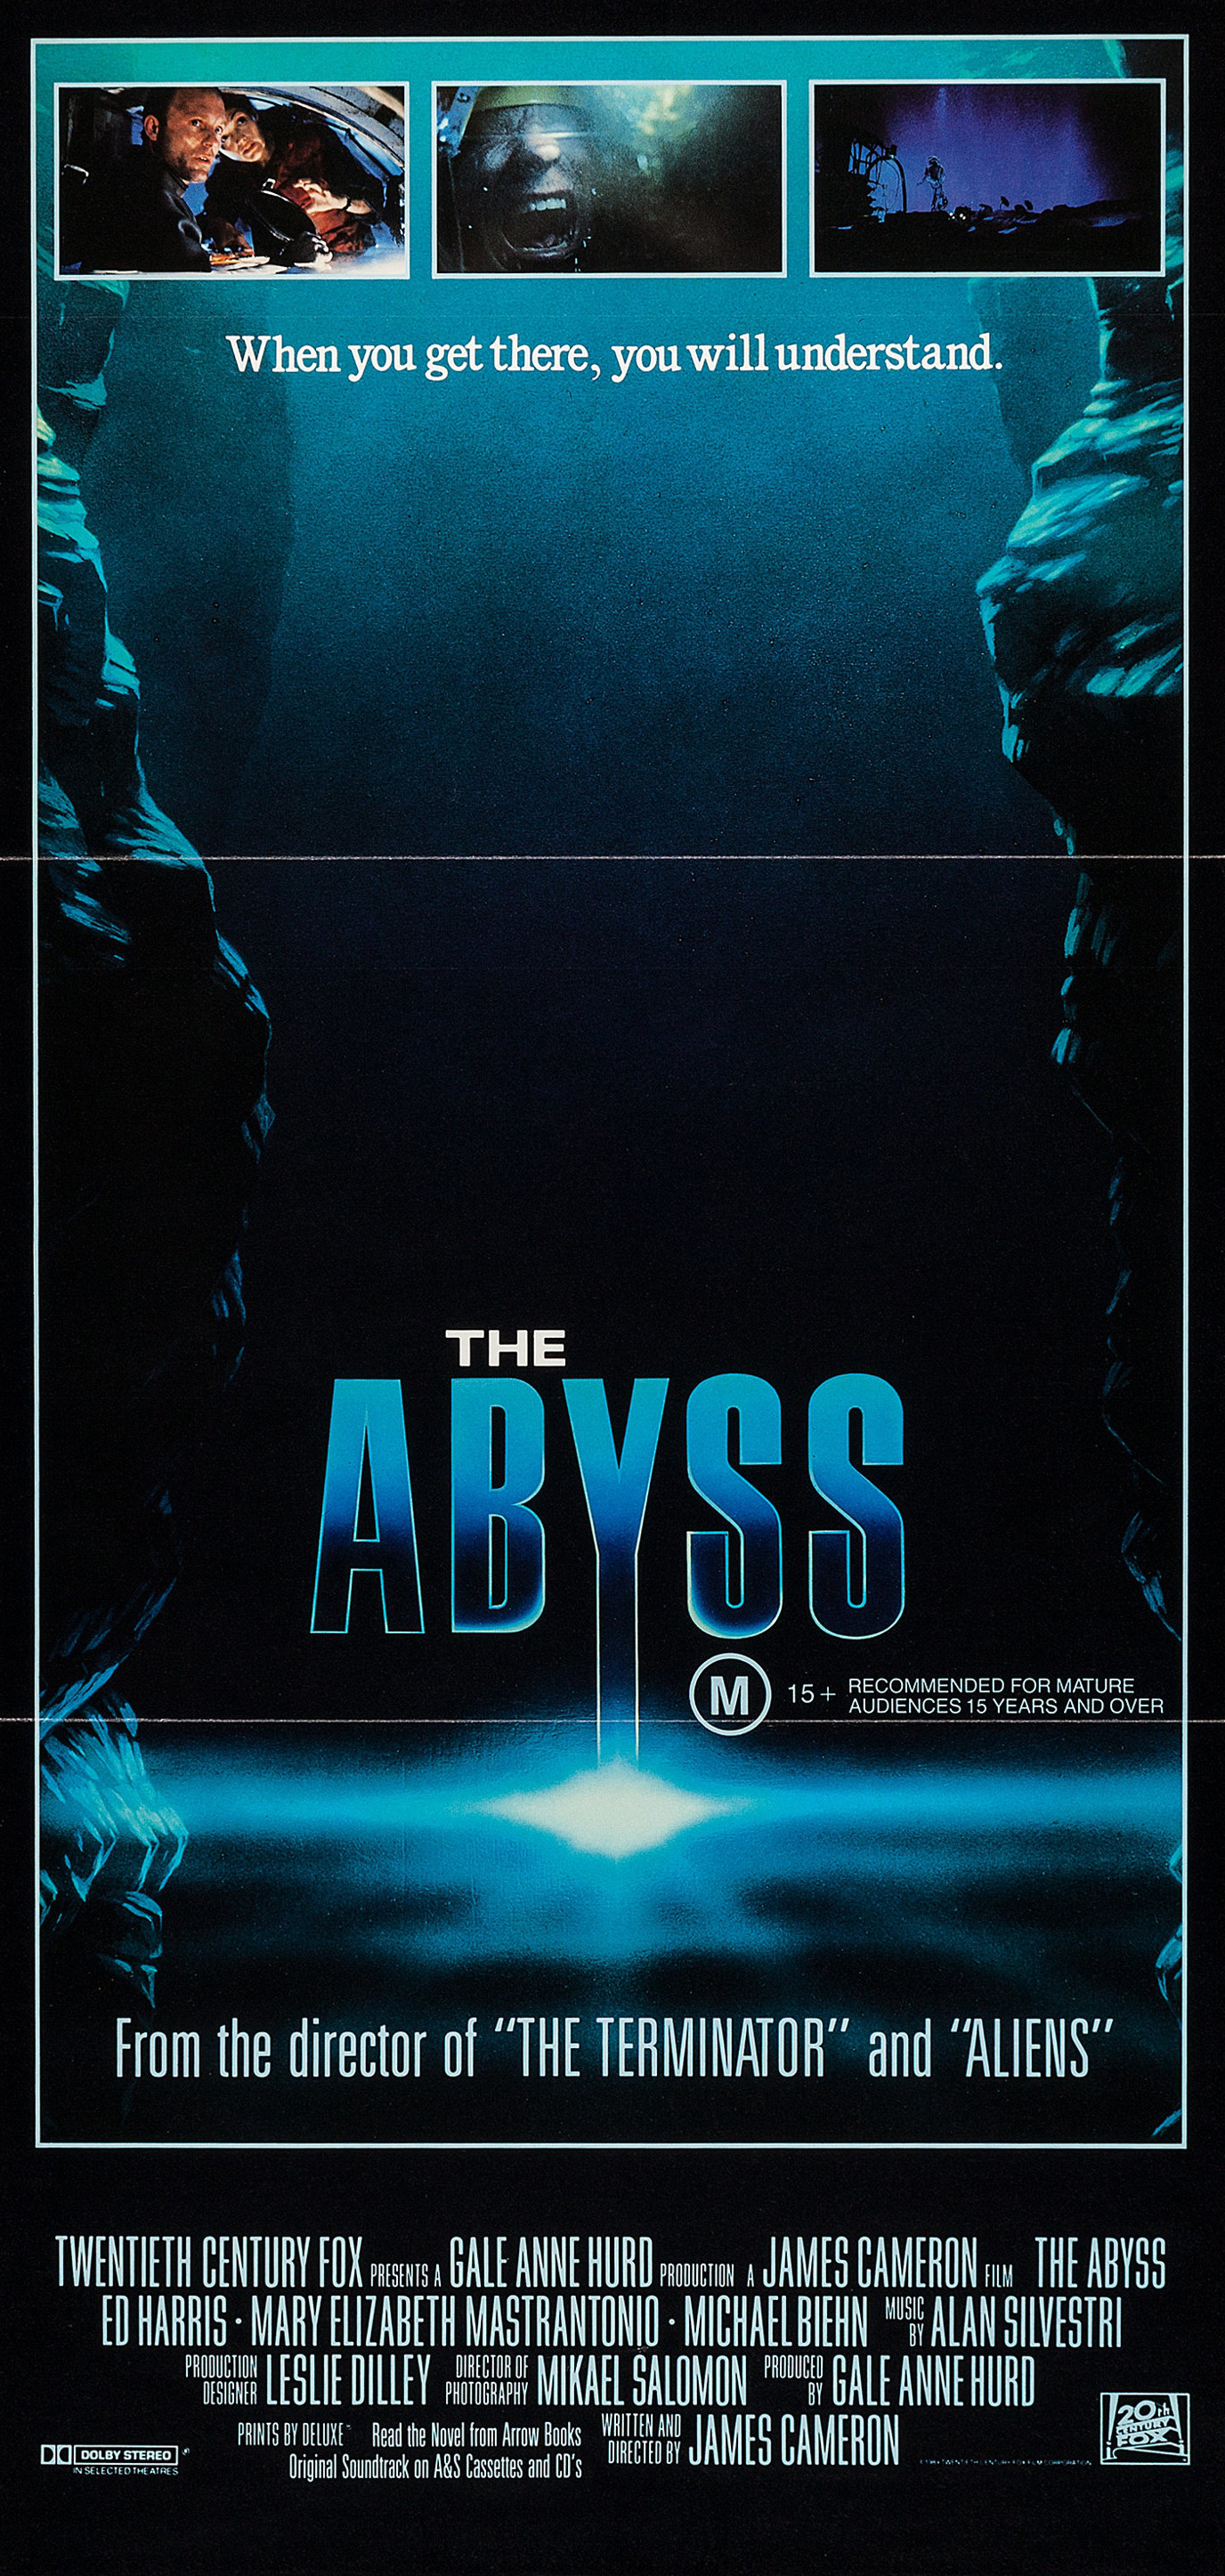 Return to Abyss download the new